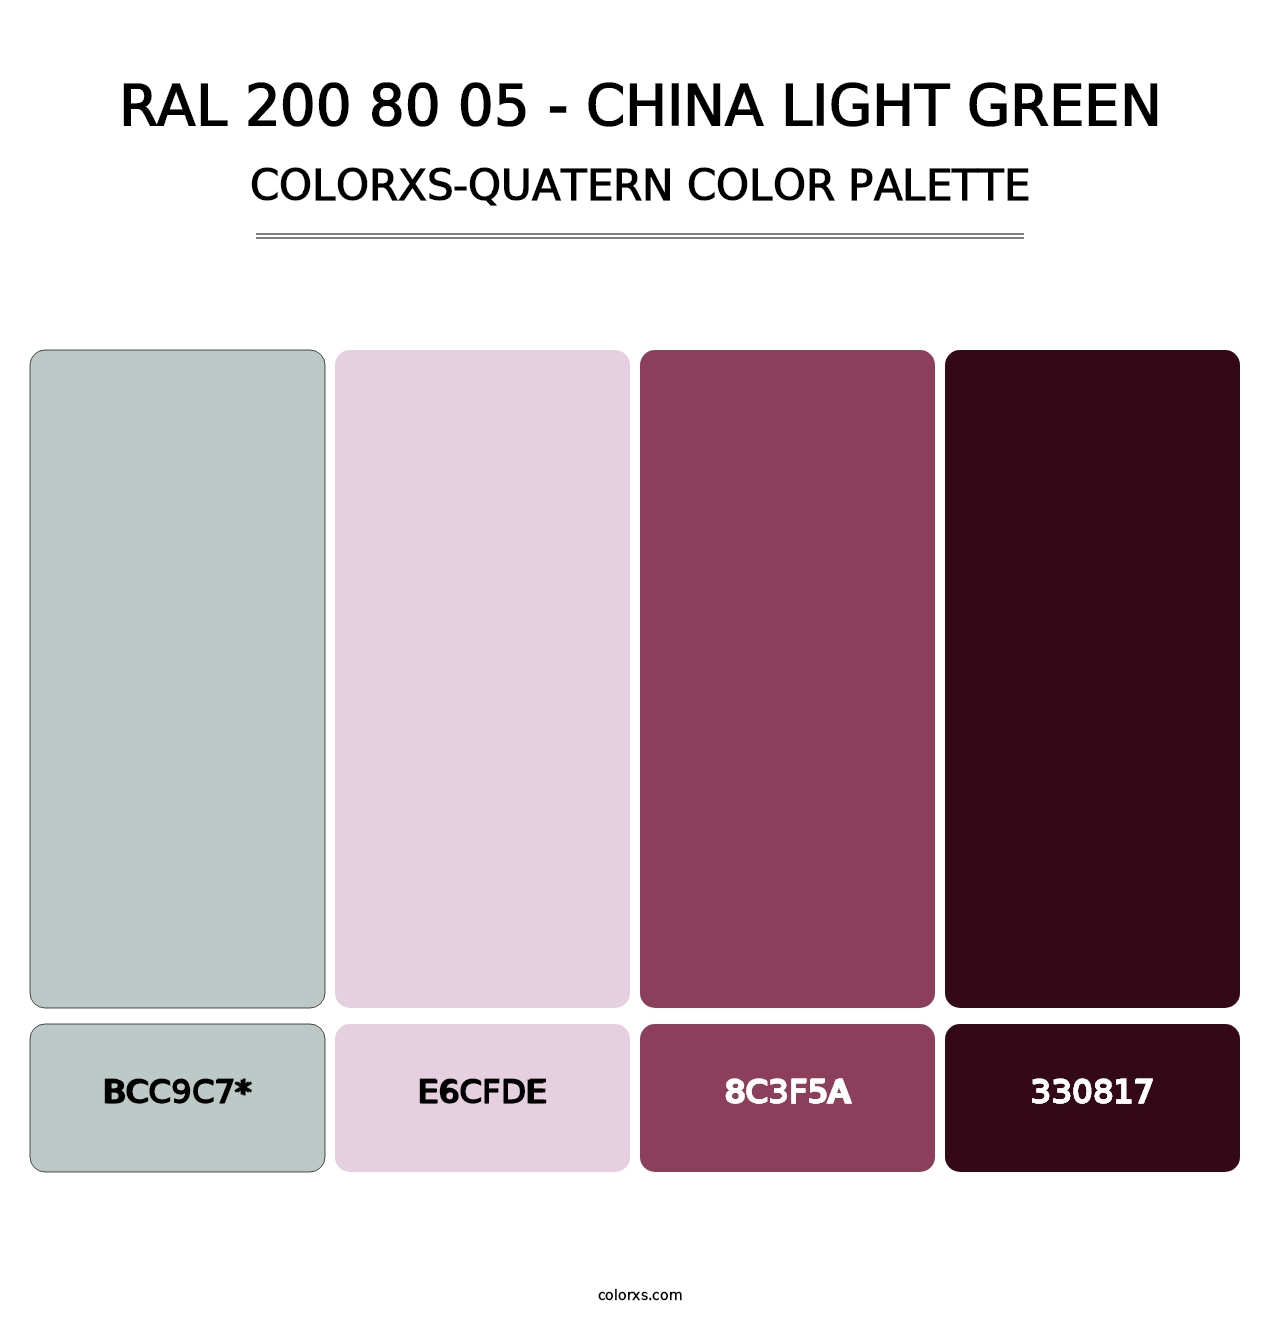 RAL 200 80 05 - China Light Green - Colorxs Quatern Palette